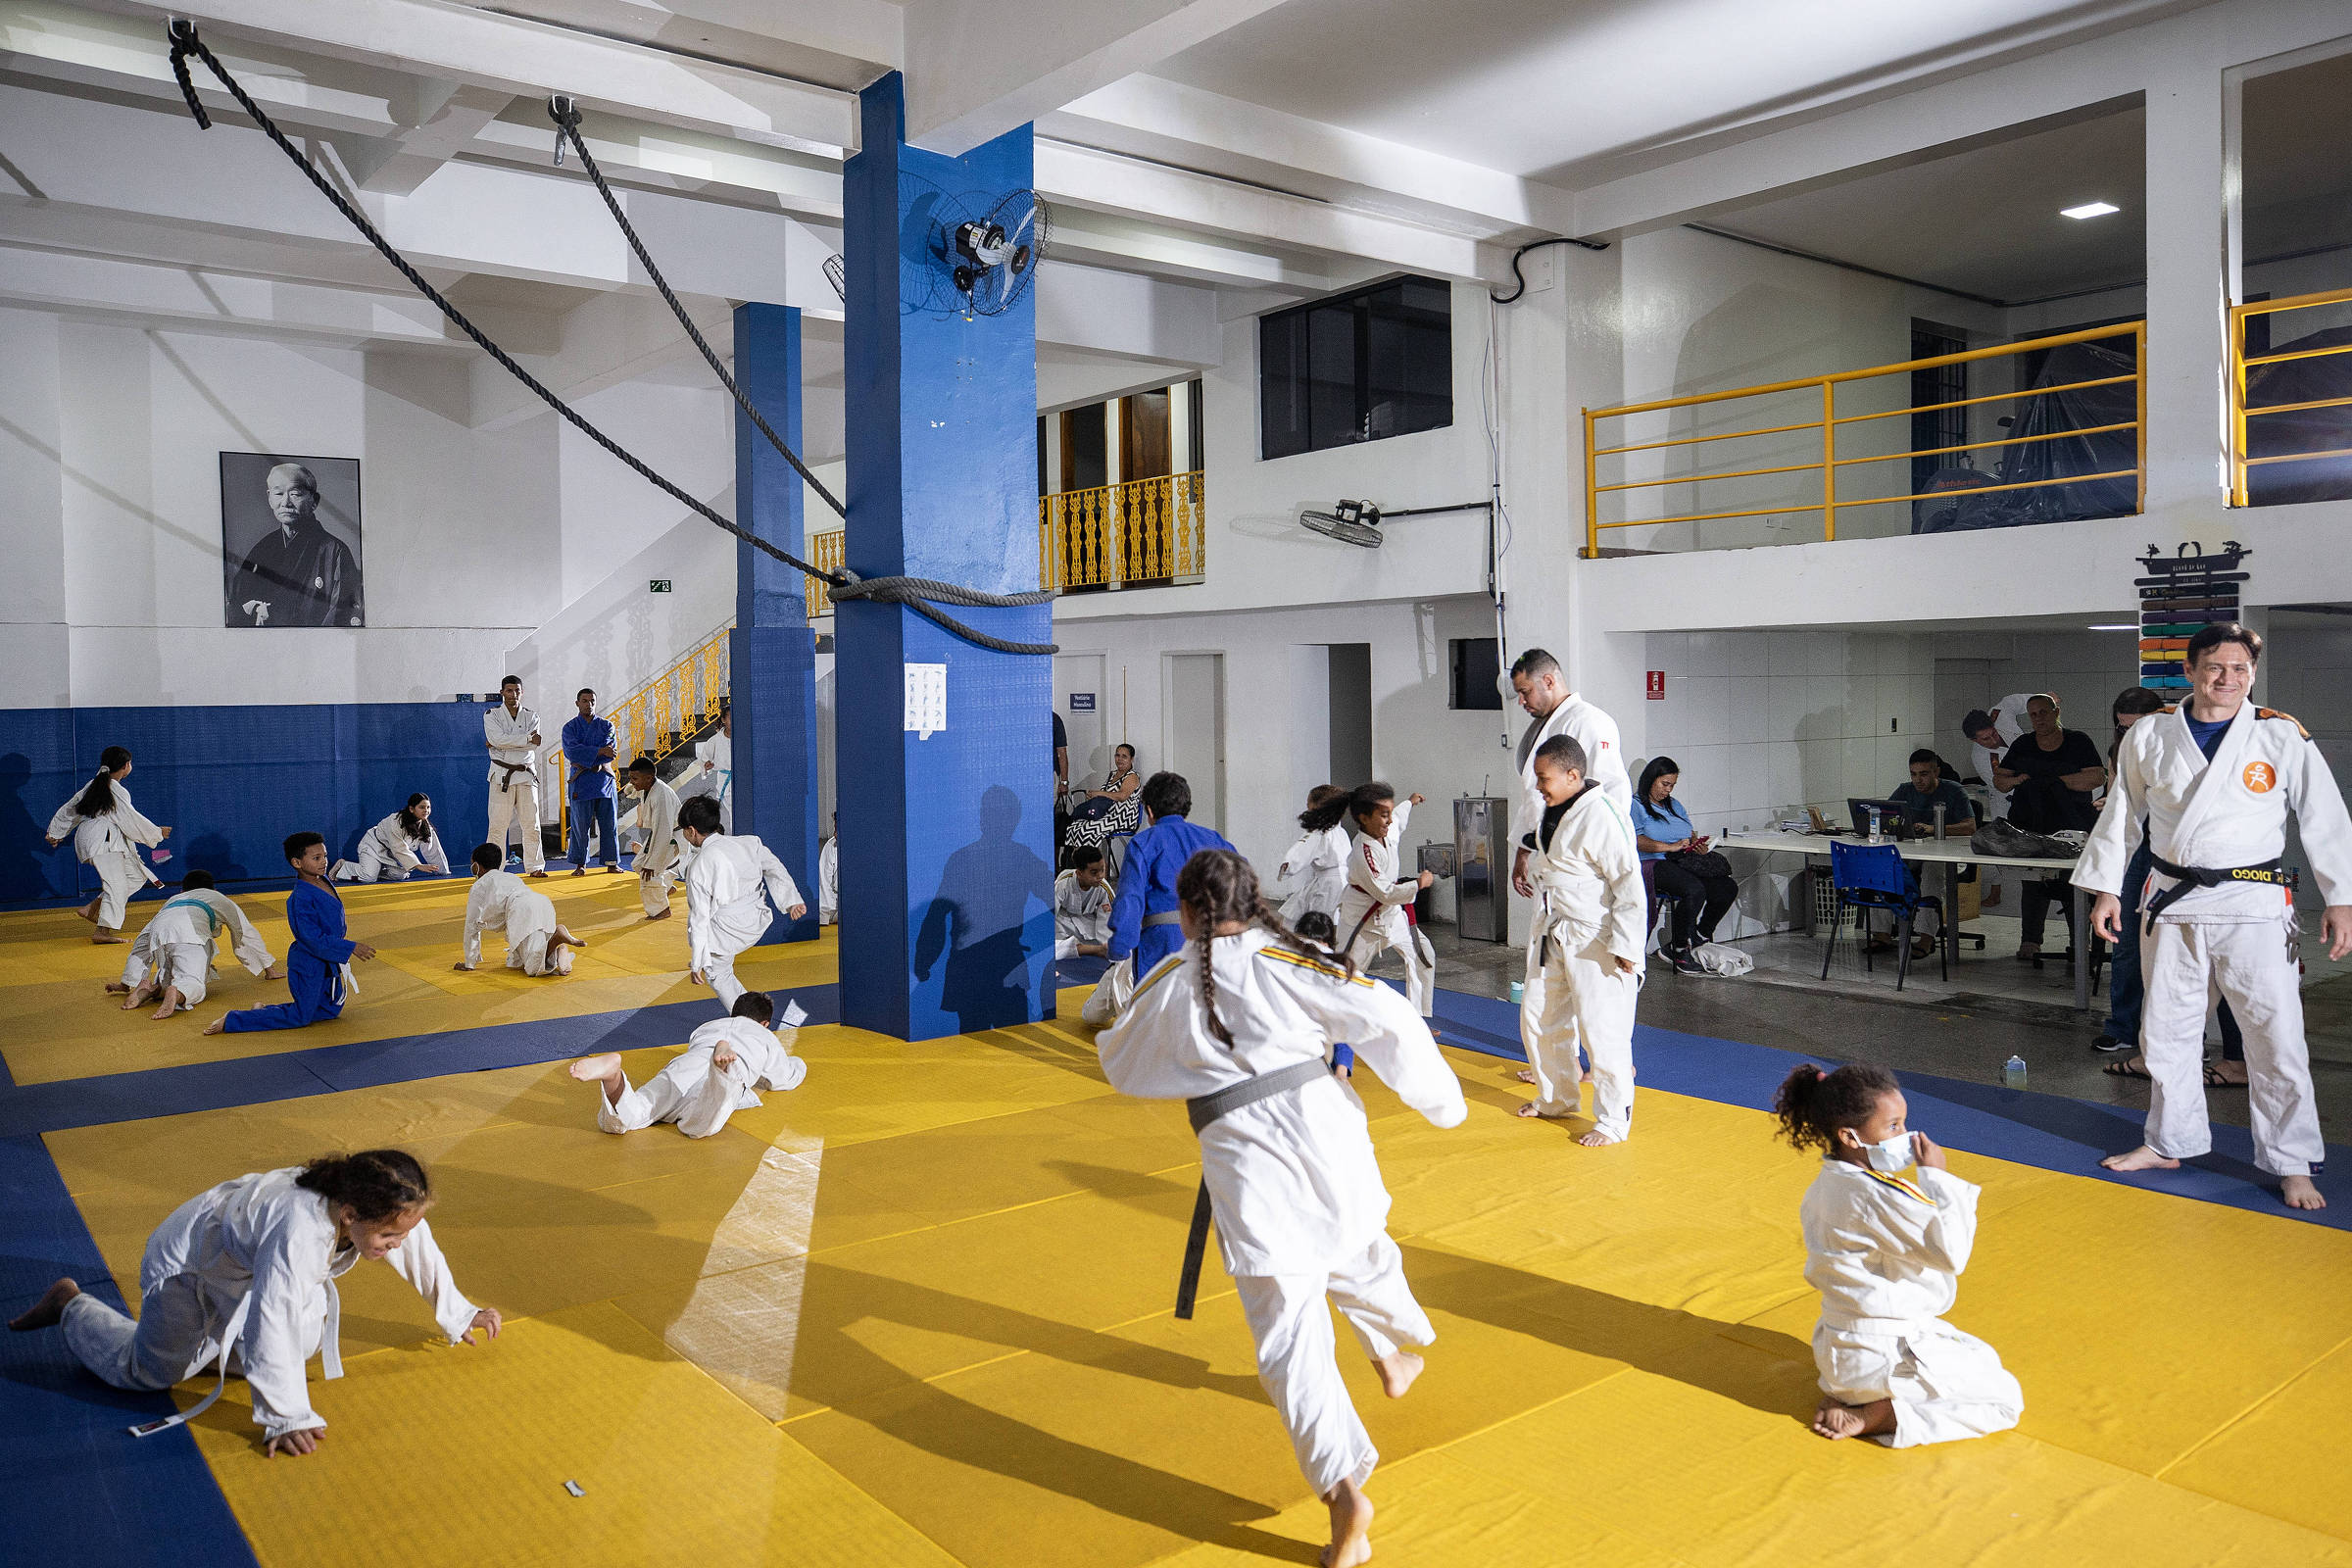 Project that brings judo to low-income young people and reveals Olympic champion arrives in São Paulo